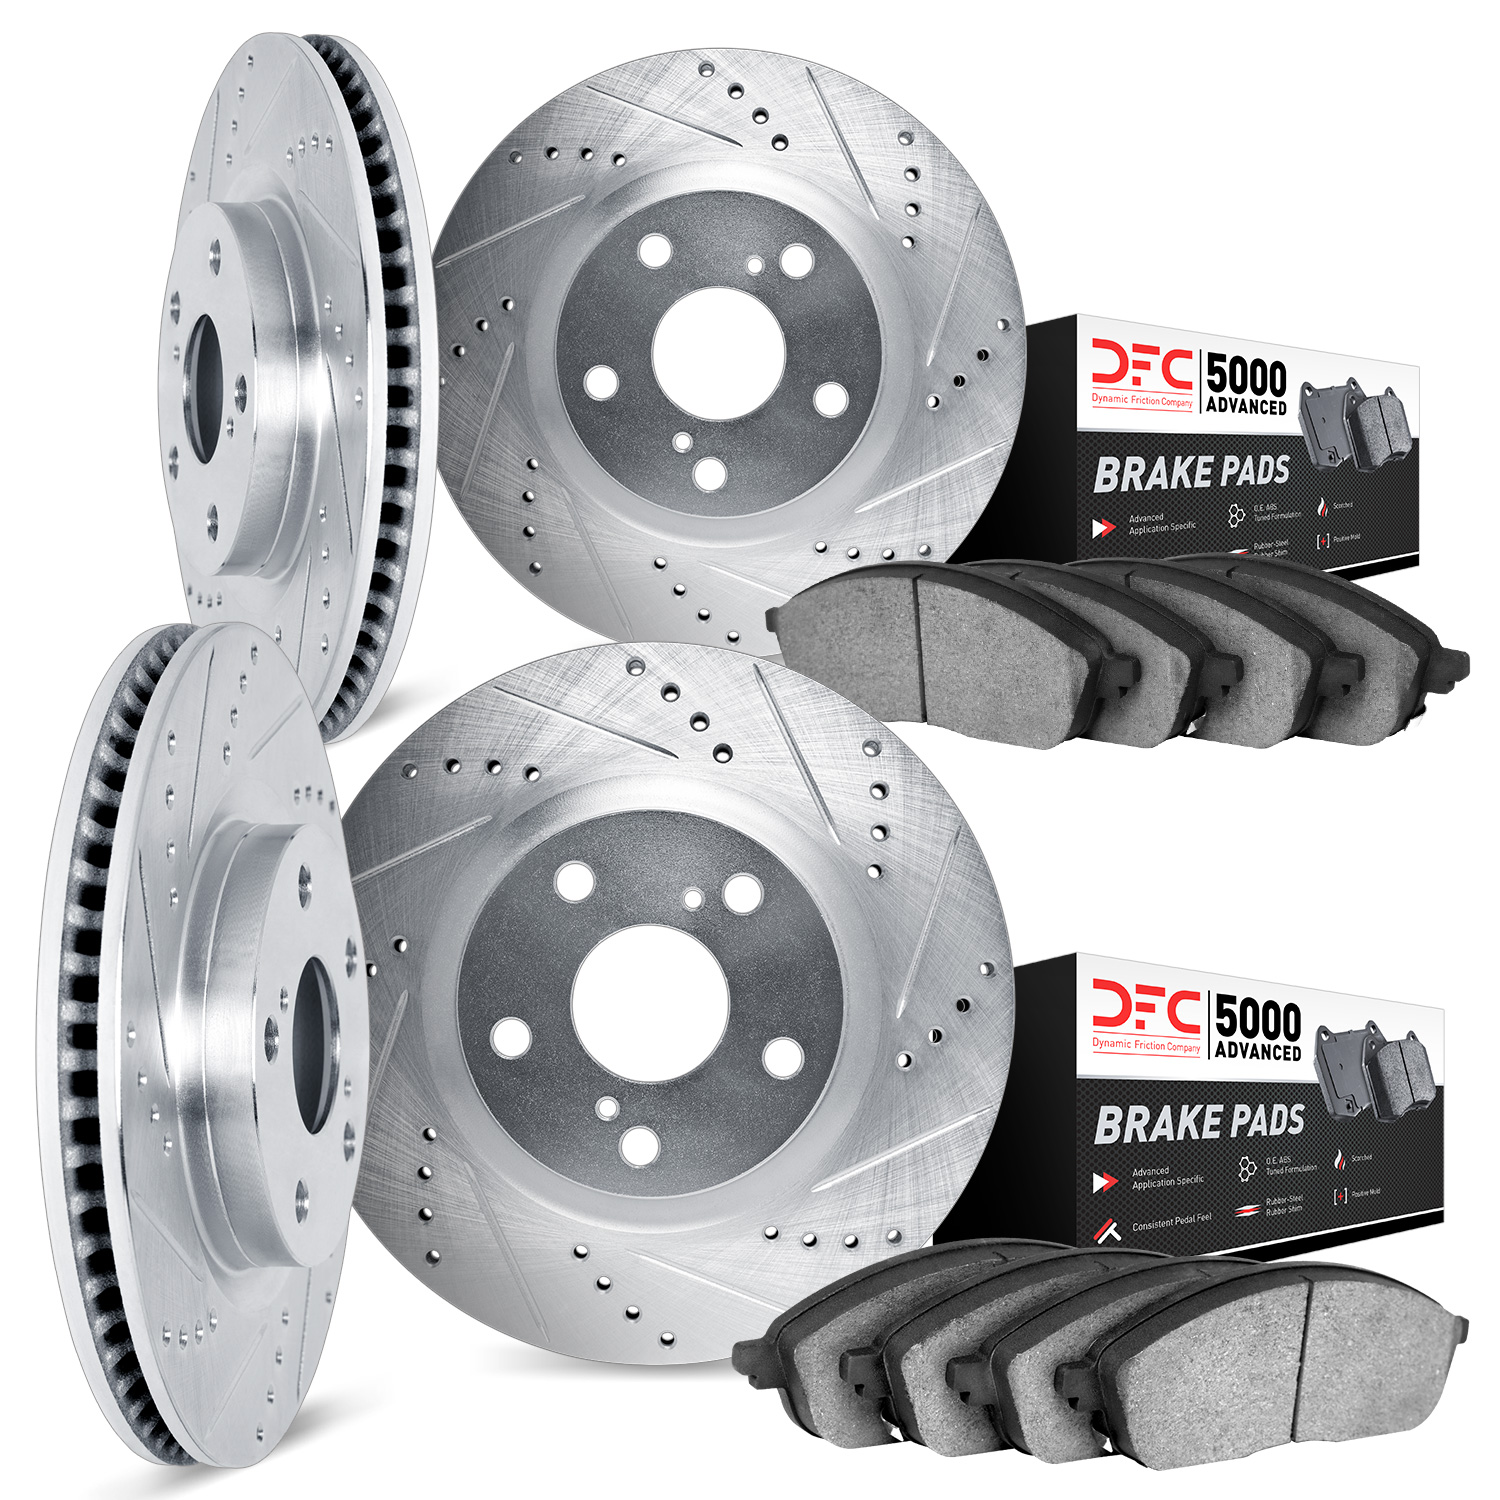 7504-40254 Drilled/Slotted Brake Rotors w/5000 Advanced Brake Pads Kit [Silver], 2014-2021 Mopar, Position: Front and Rear